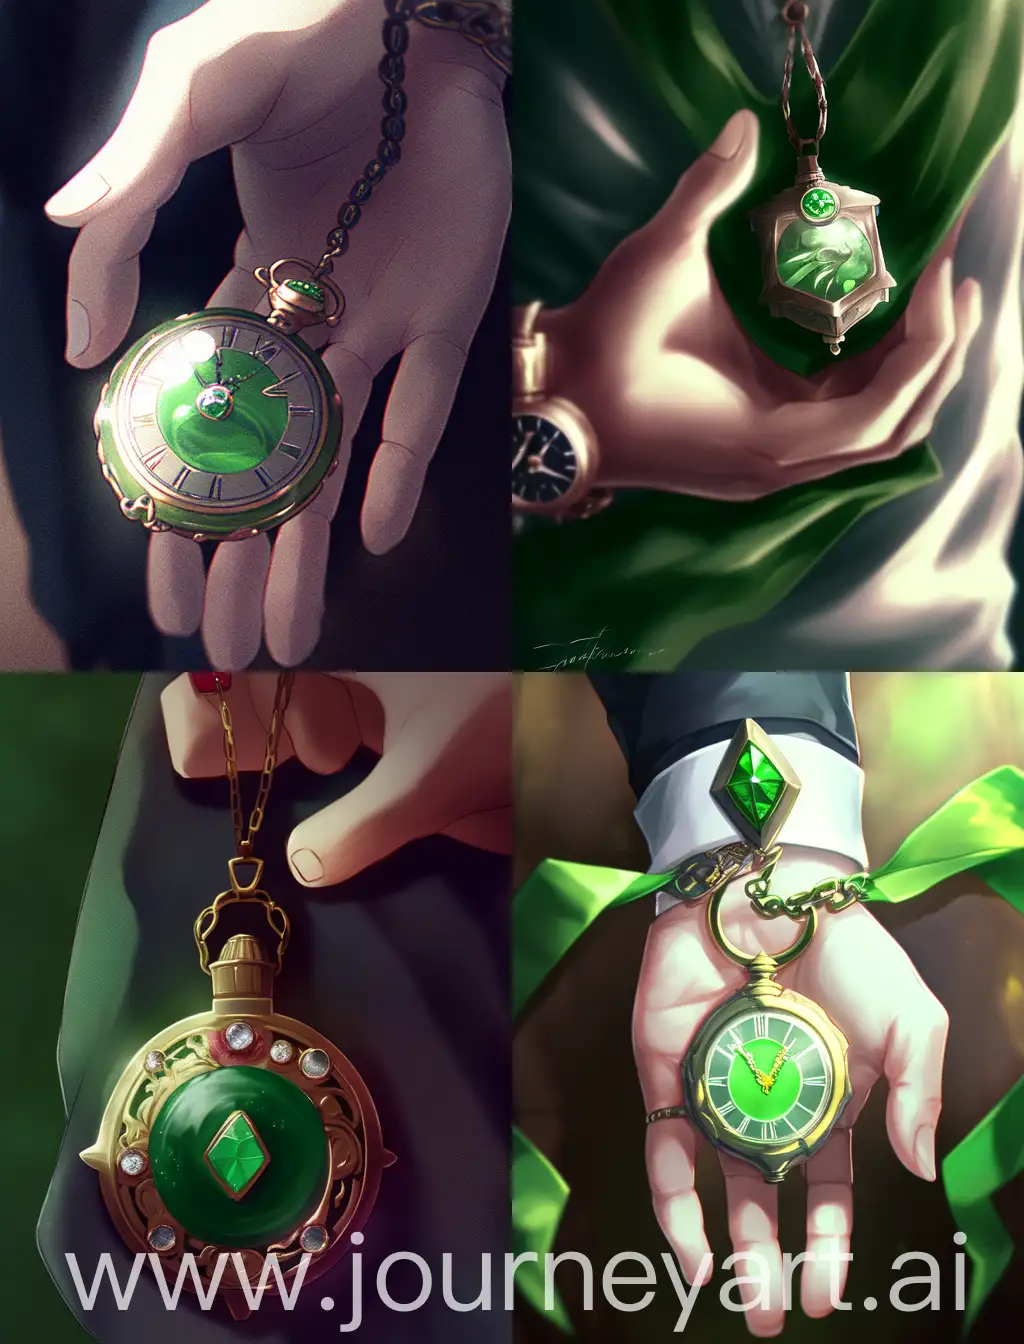 The green time amulet in the guy's hand.